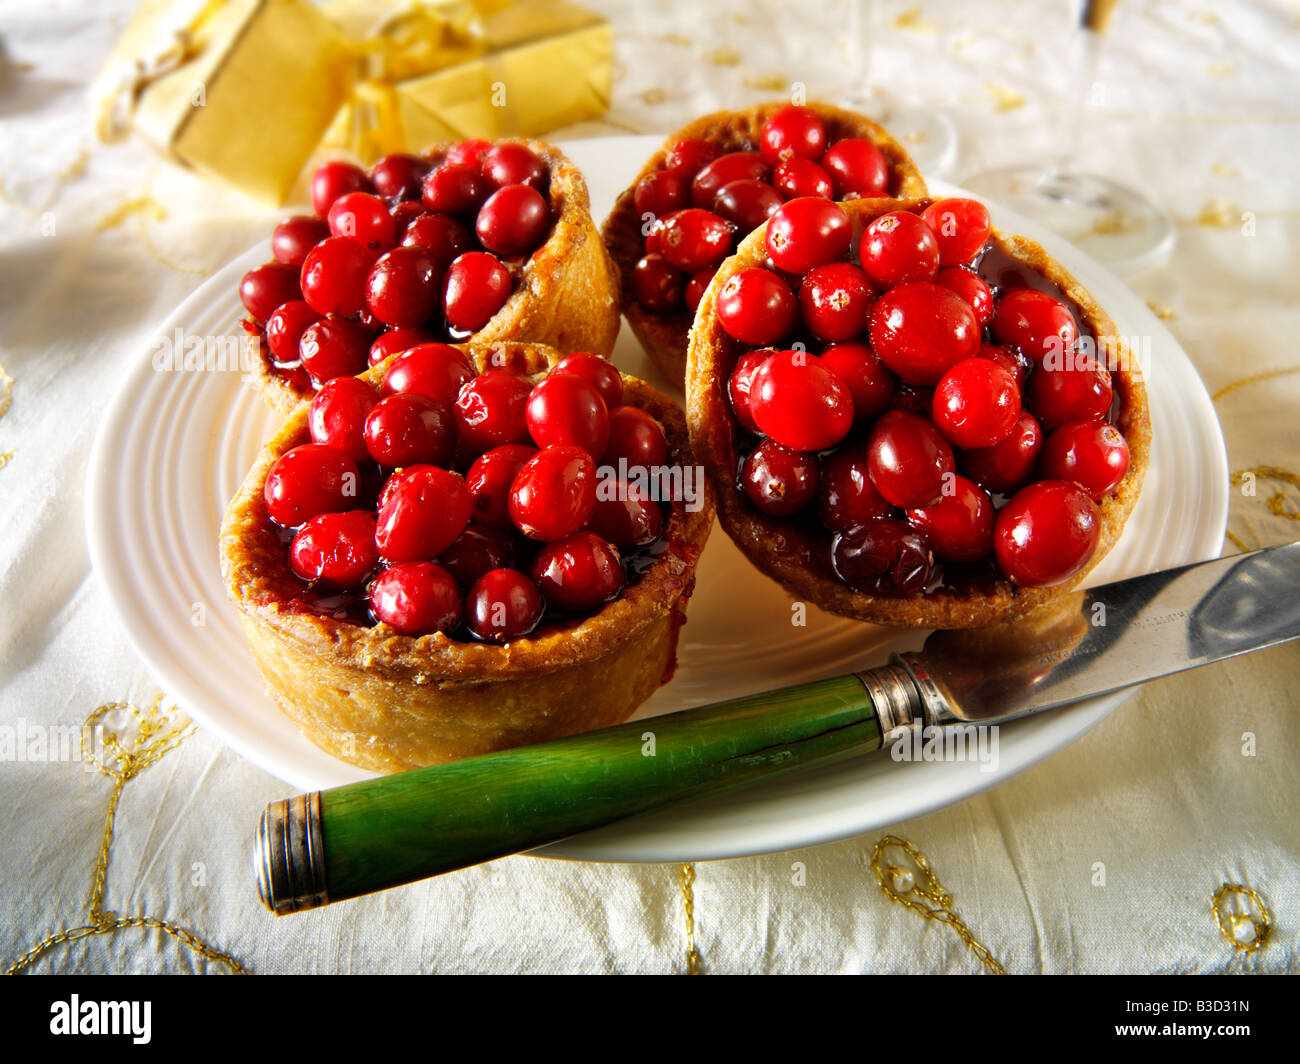 Cranberry topped pork pie - traditional British winter 'christmas food' Stock Photo